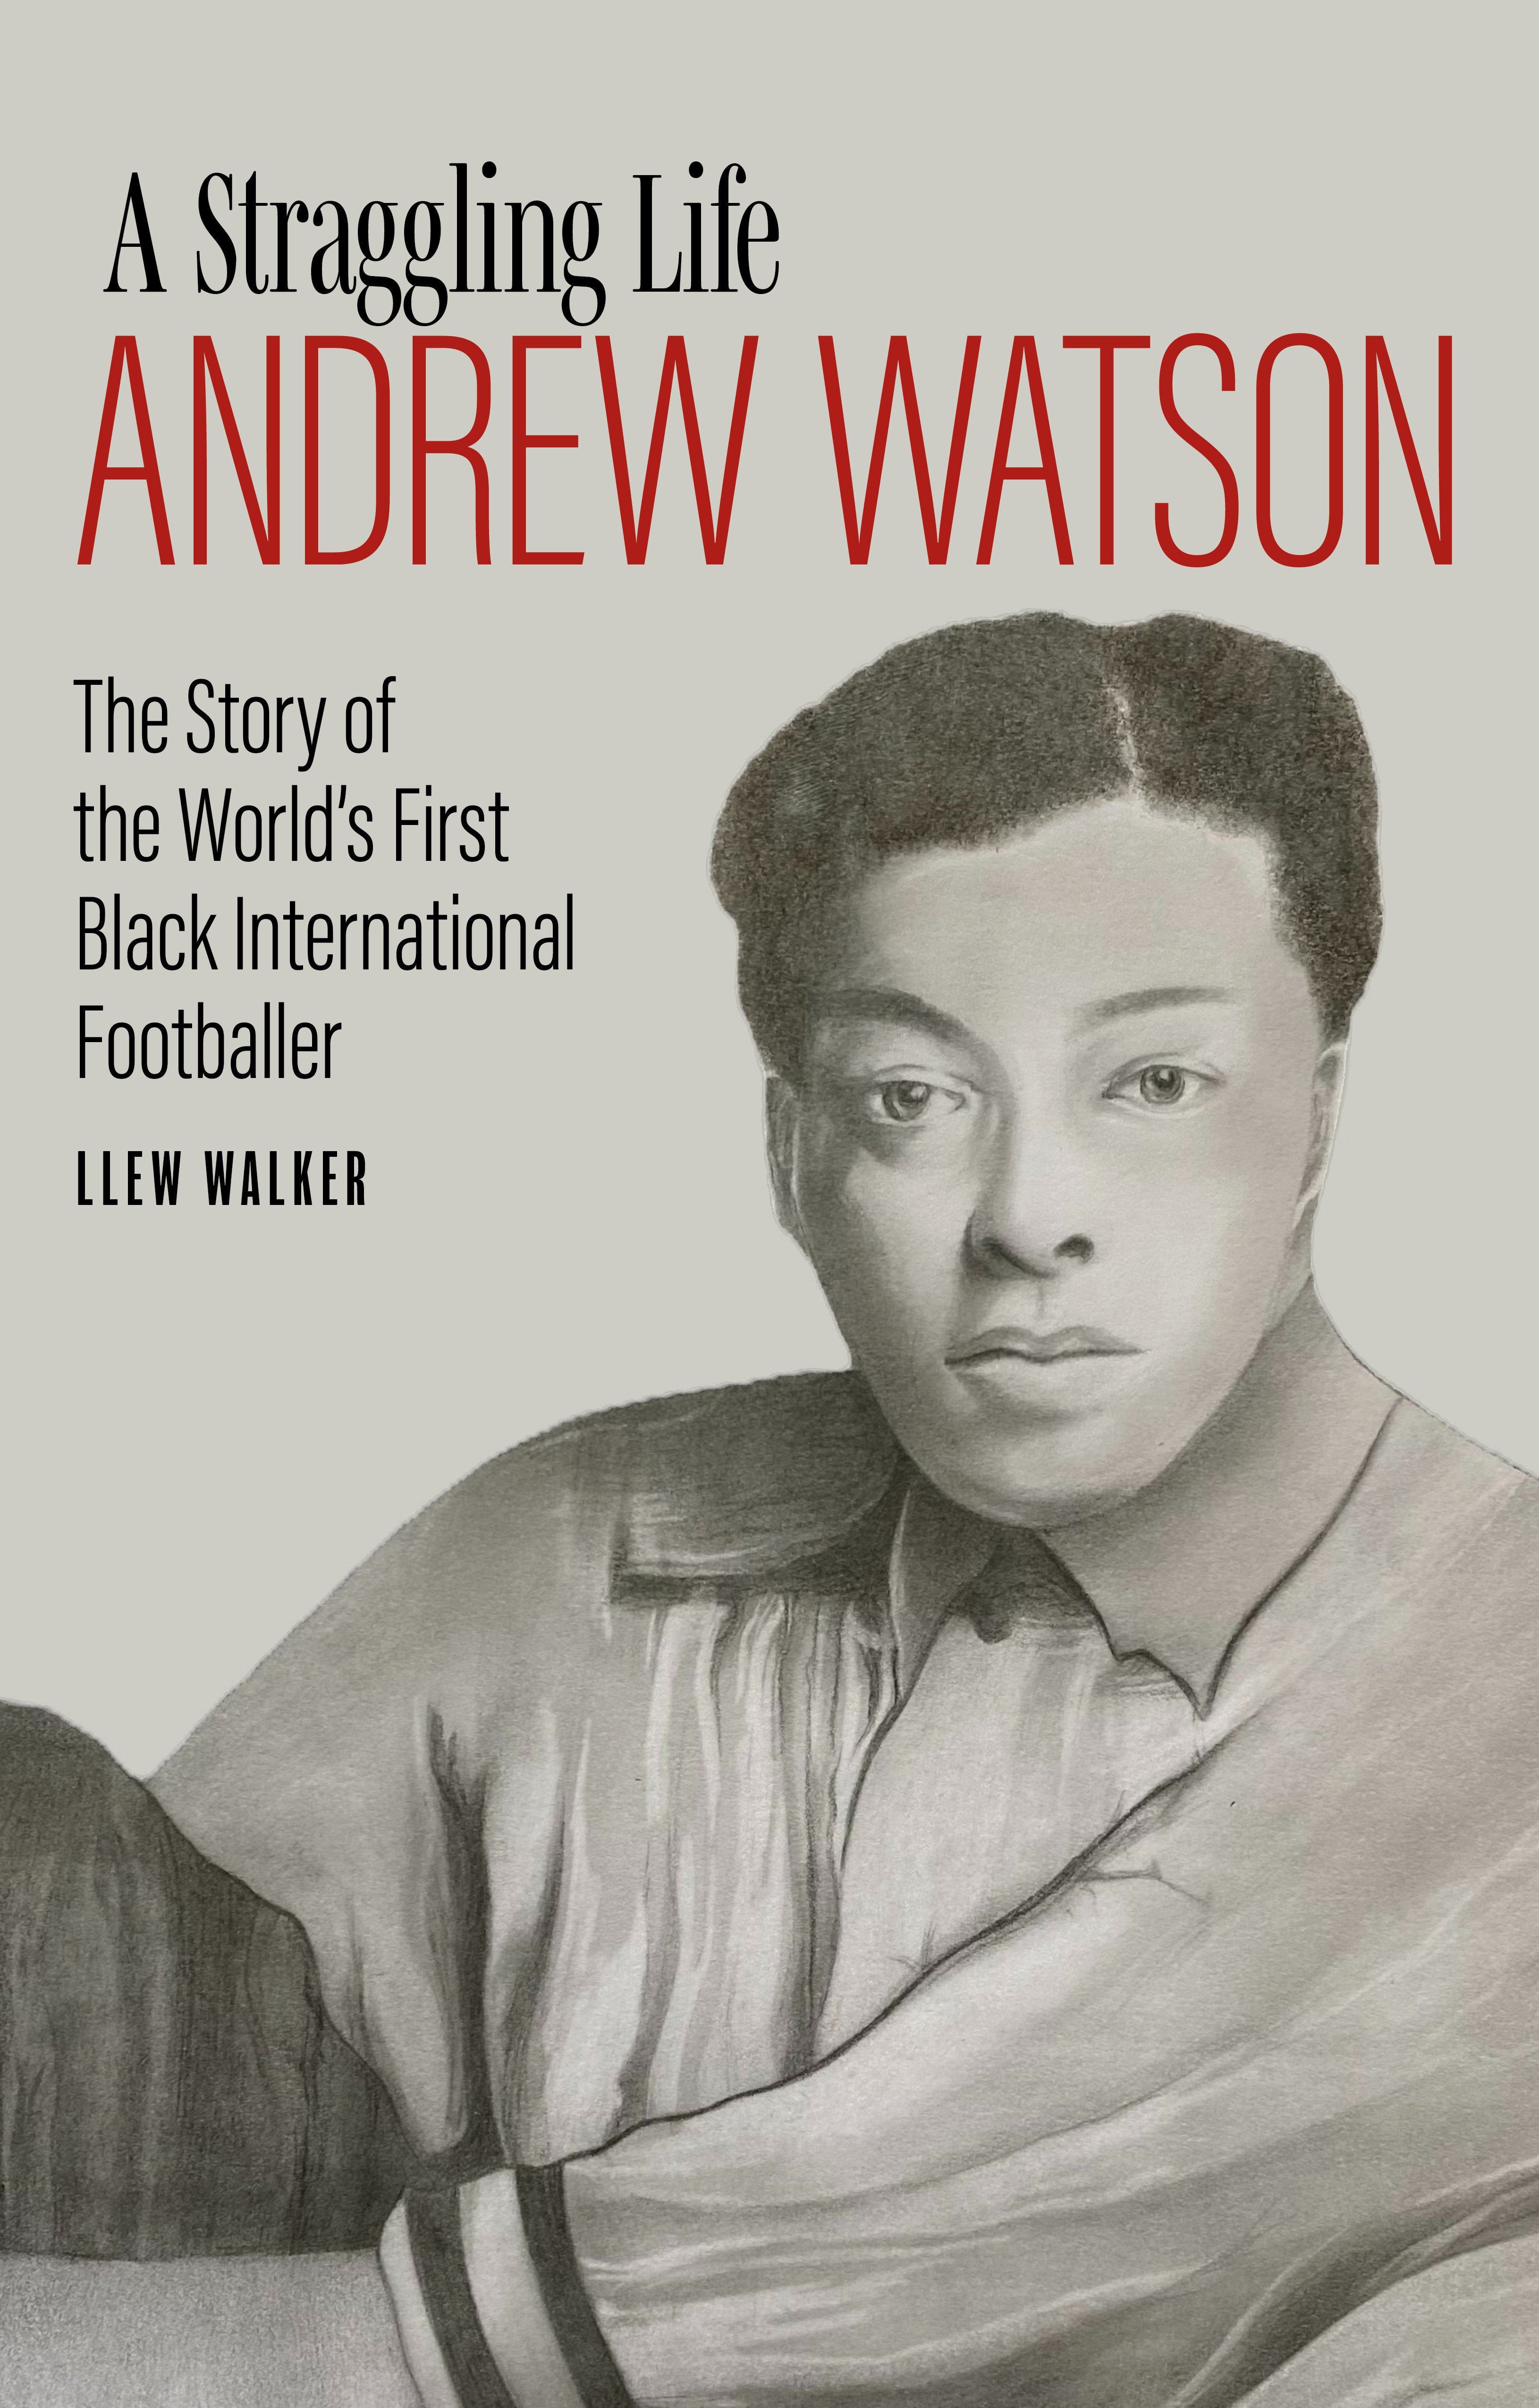 Andrew Watson, A Straggling Life